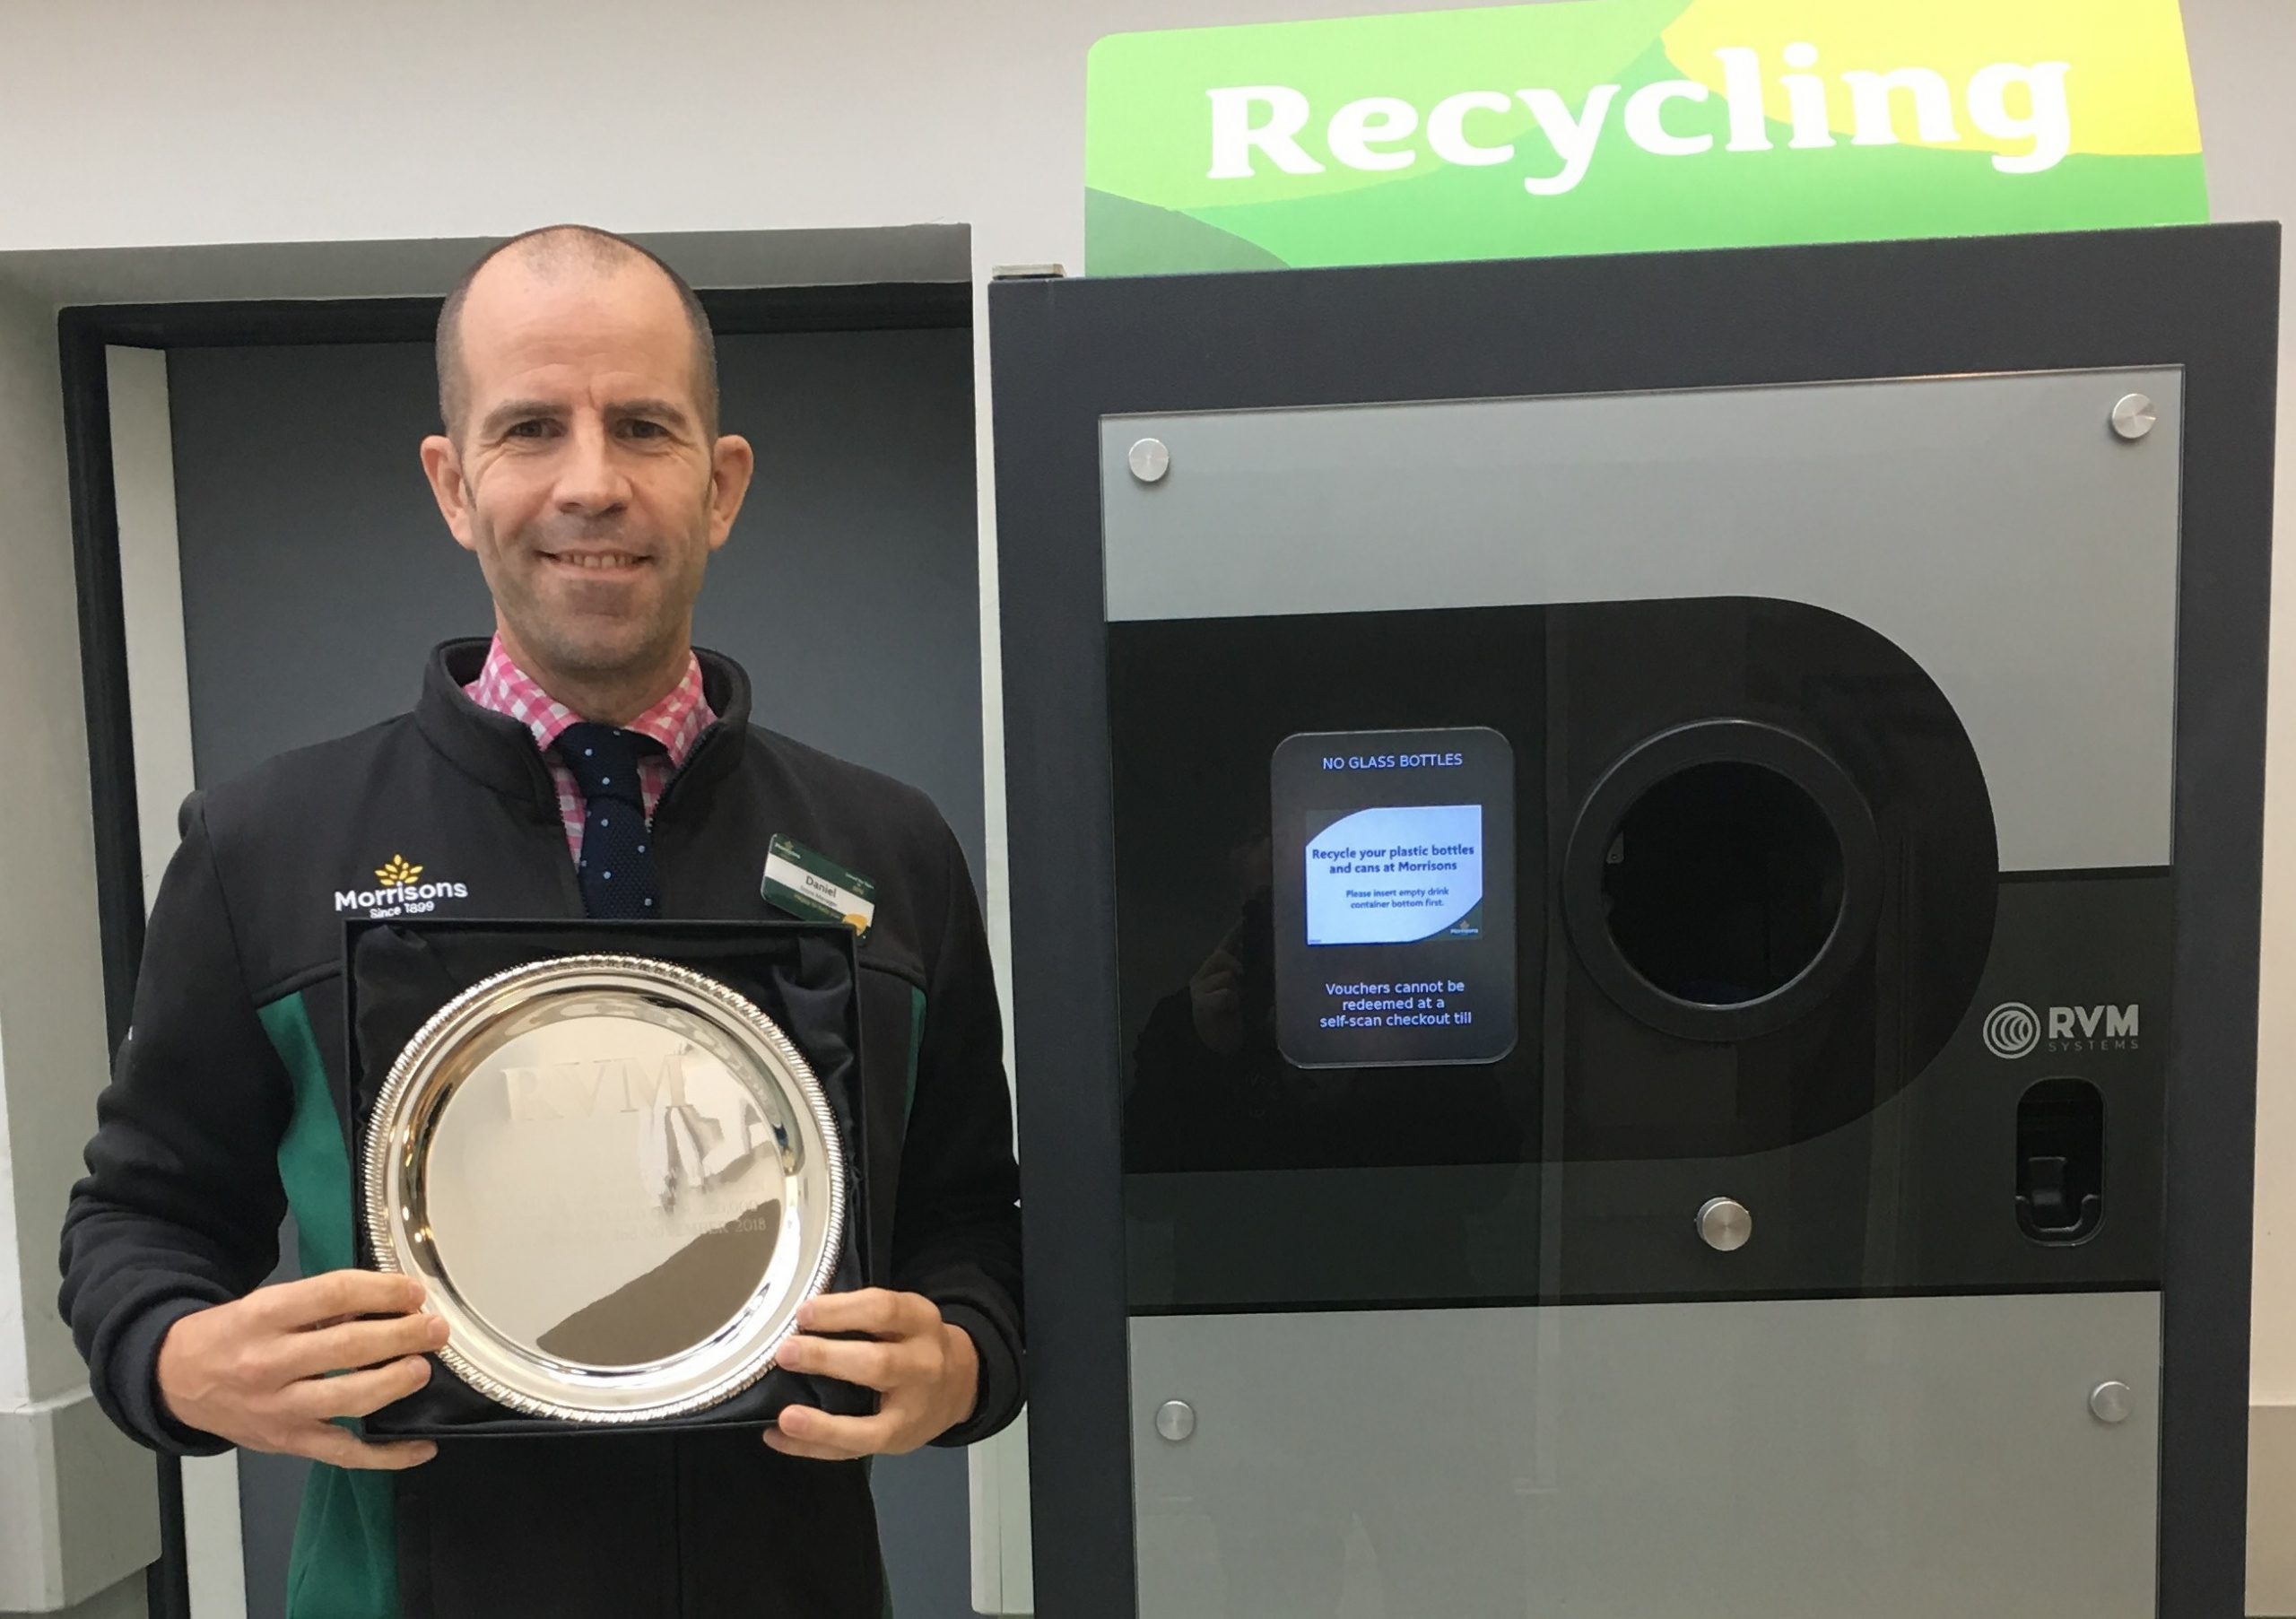 Morrisons Wood Green Store recycle over 250,000 used drink containers On the 9th of July 2019 RVM Systems presented an award to Morrisons Wood Green store manager Daniel Haffenden to celebrate that the store has recycled over 250,000 plastic drink bottles and drink cans since the 2nd of November 2018.